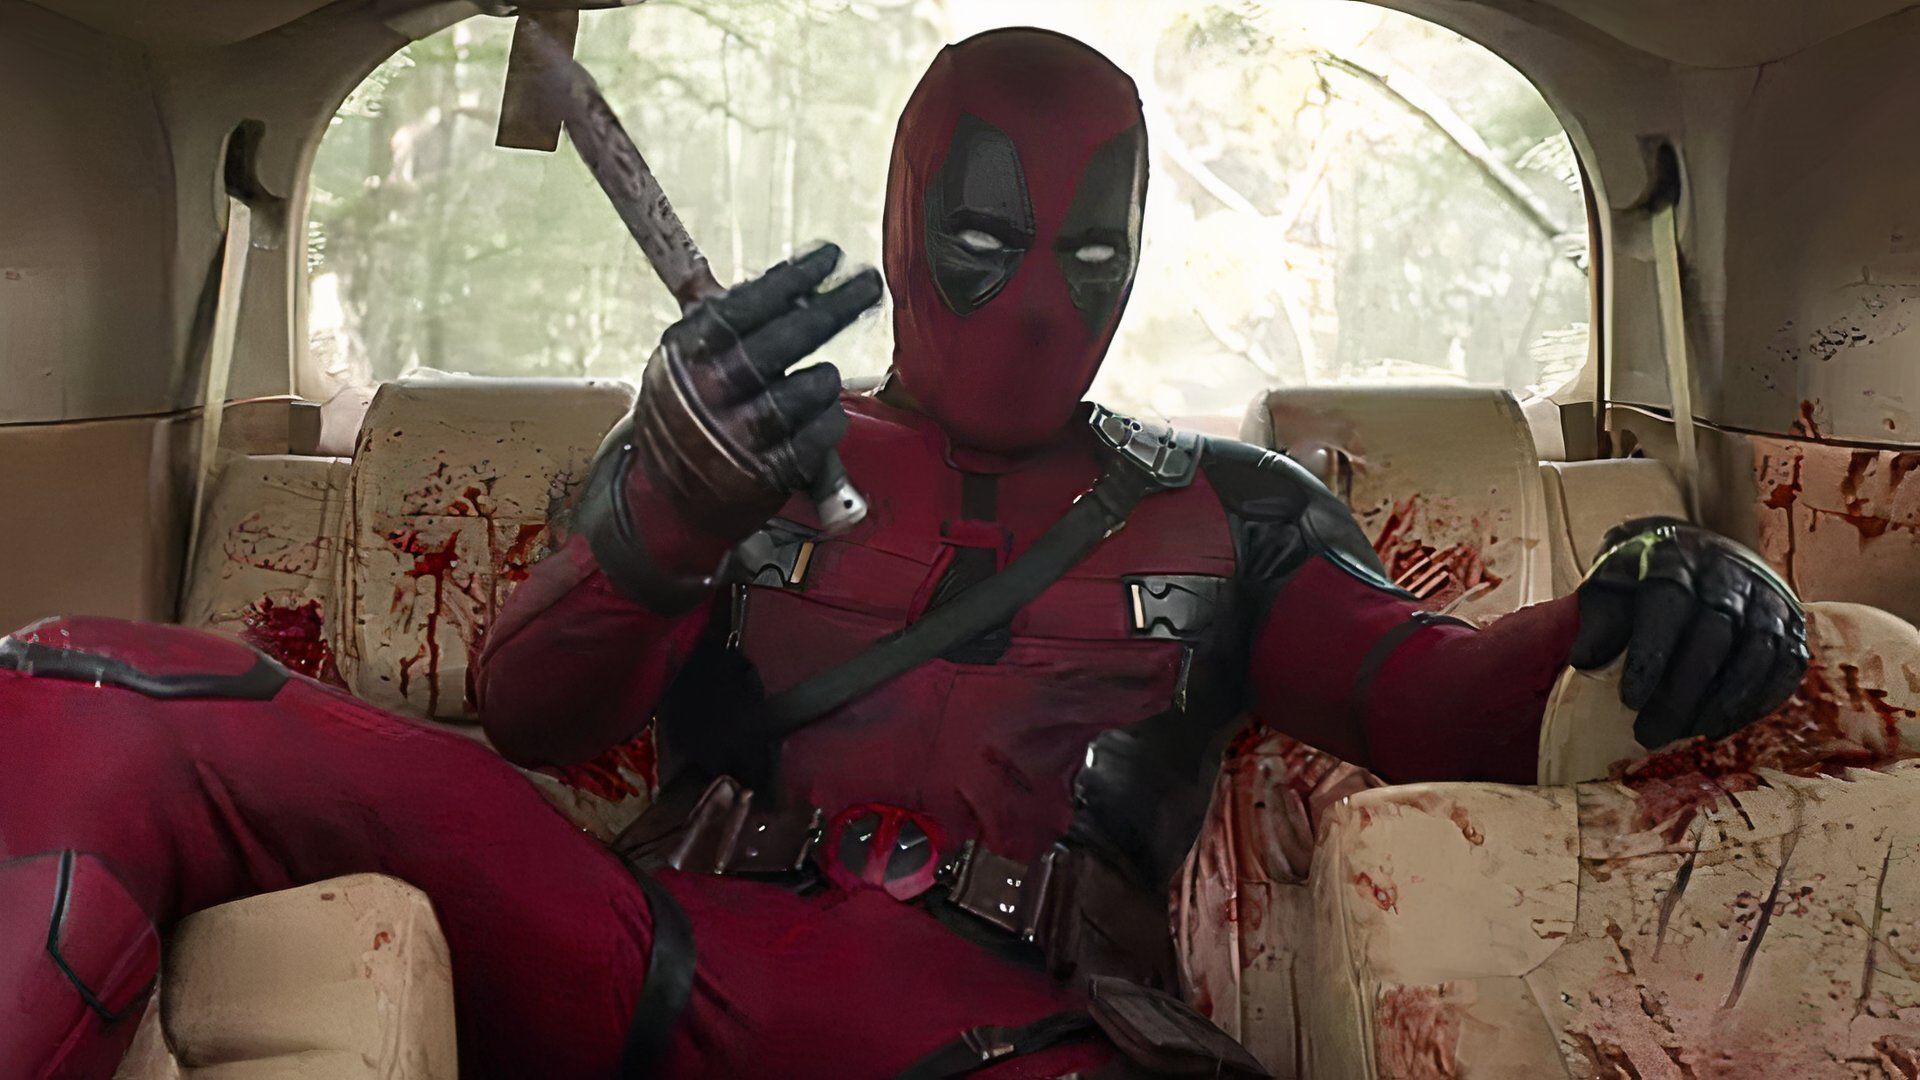 Deadpool surrounded by blood in the back of a car.